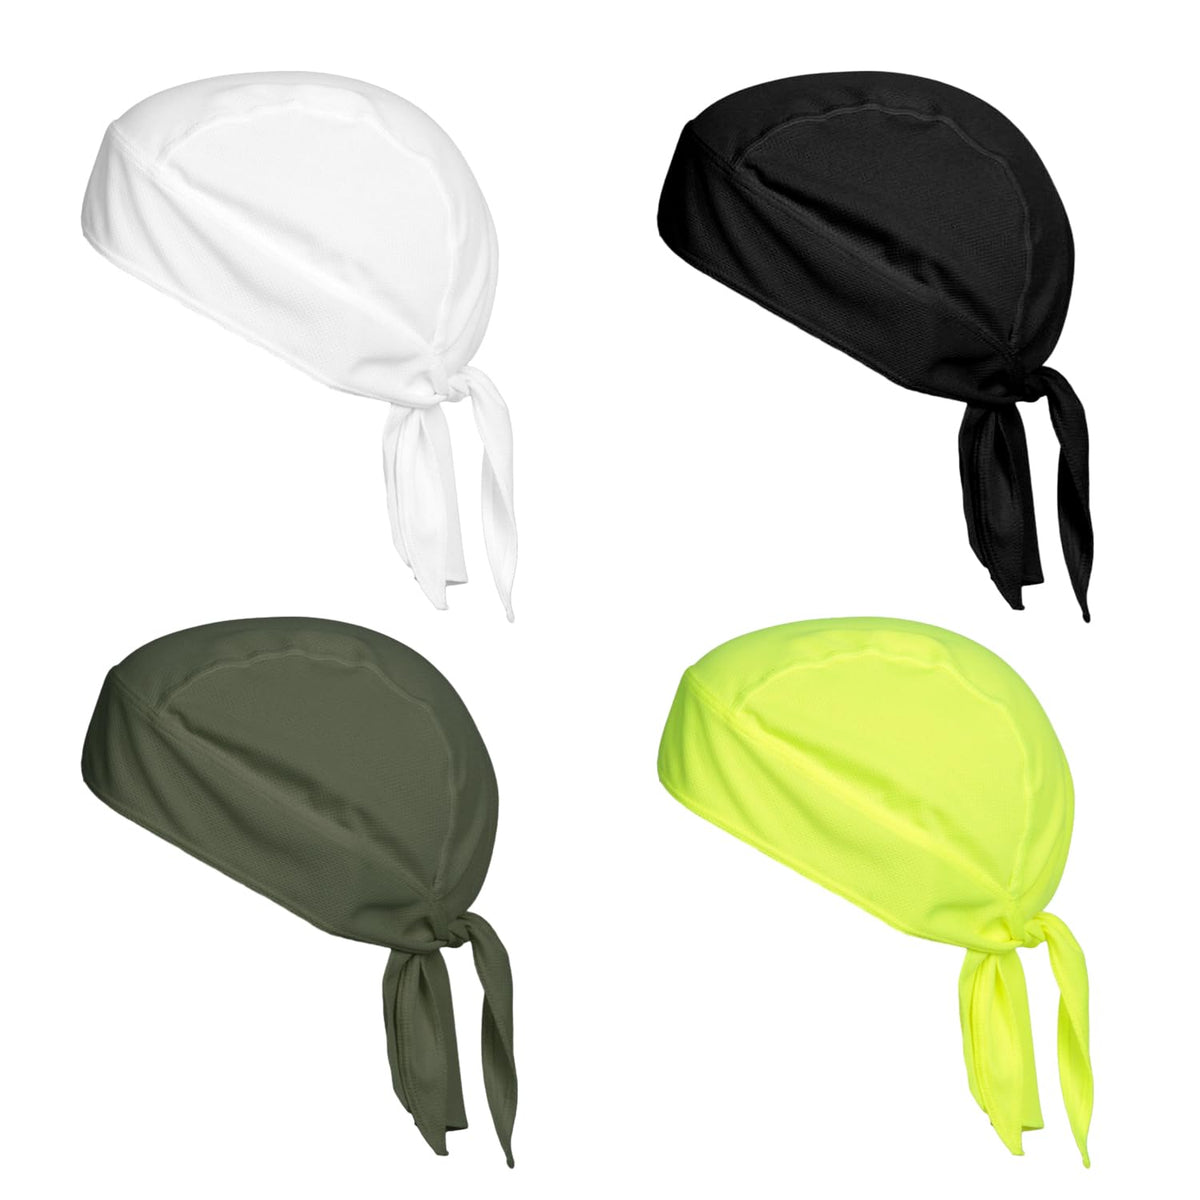 KVBUCC 4 Quick-Drying Turban Hats, Bicycle and Motorcycle Helmet Hoods, Unisex Pirate Scarves, Sports Sun Protection Hoods, Suitable for Climbing, Running and Cycling (4 Colors)